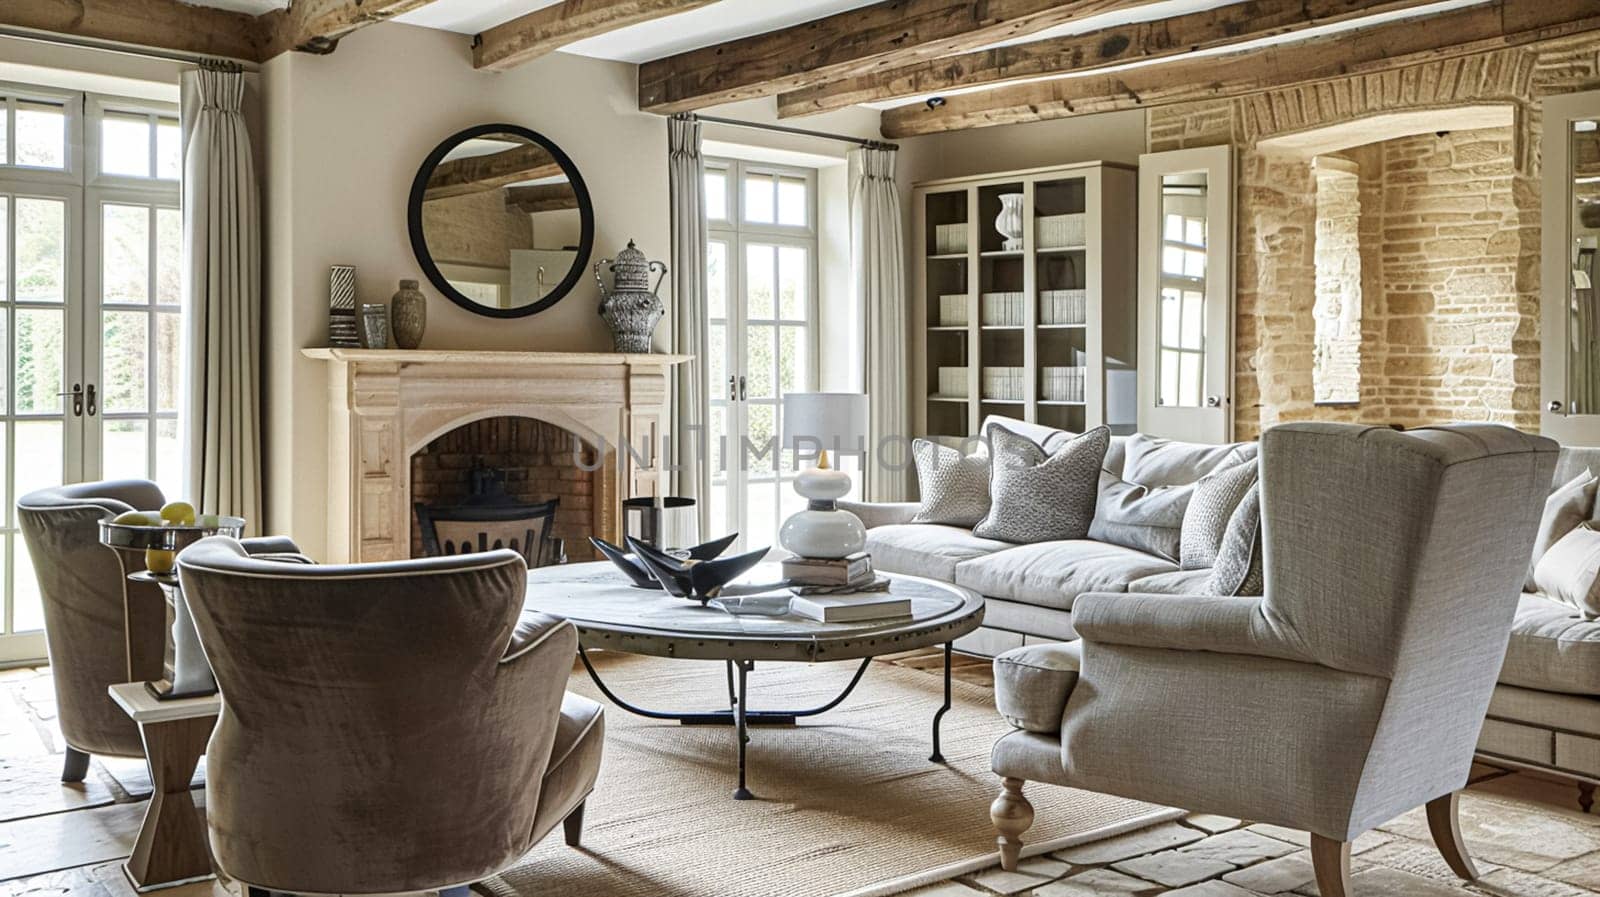 Cotswolds cottage style sitting room, living room interior design and country house home decor, sofa and lounge furniture, English countryside style by Anneleven